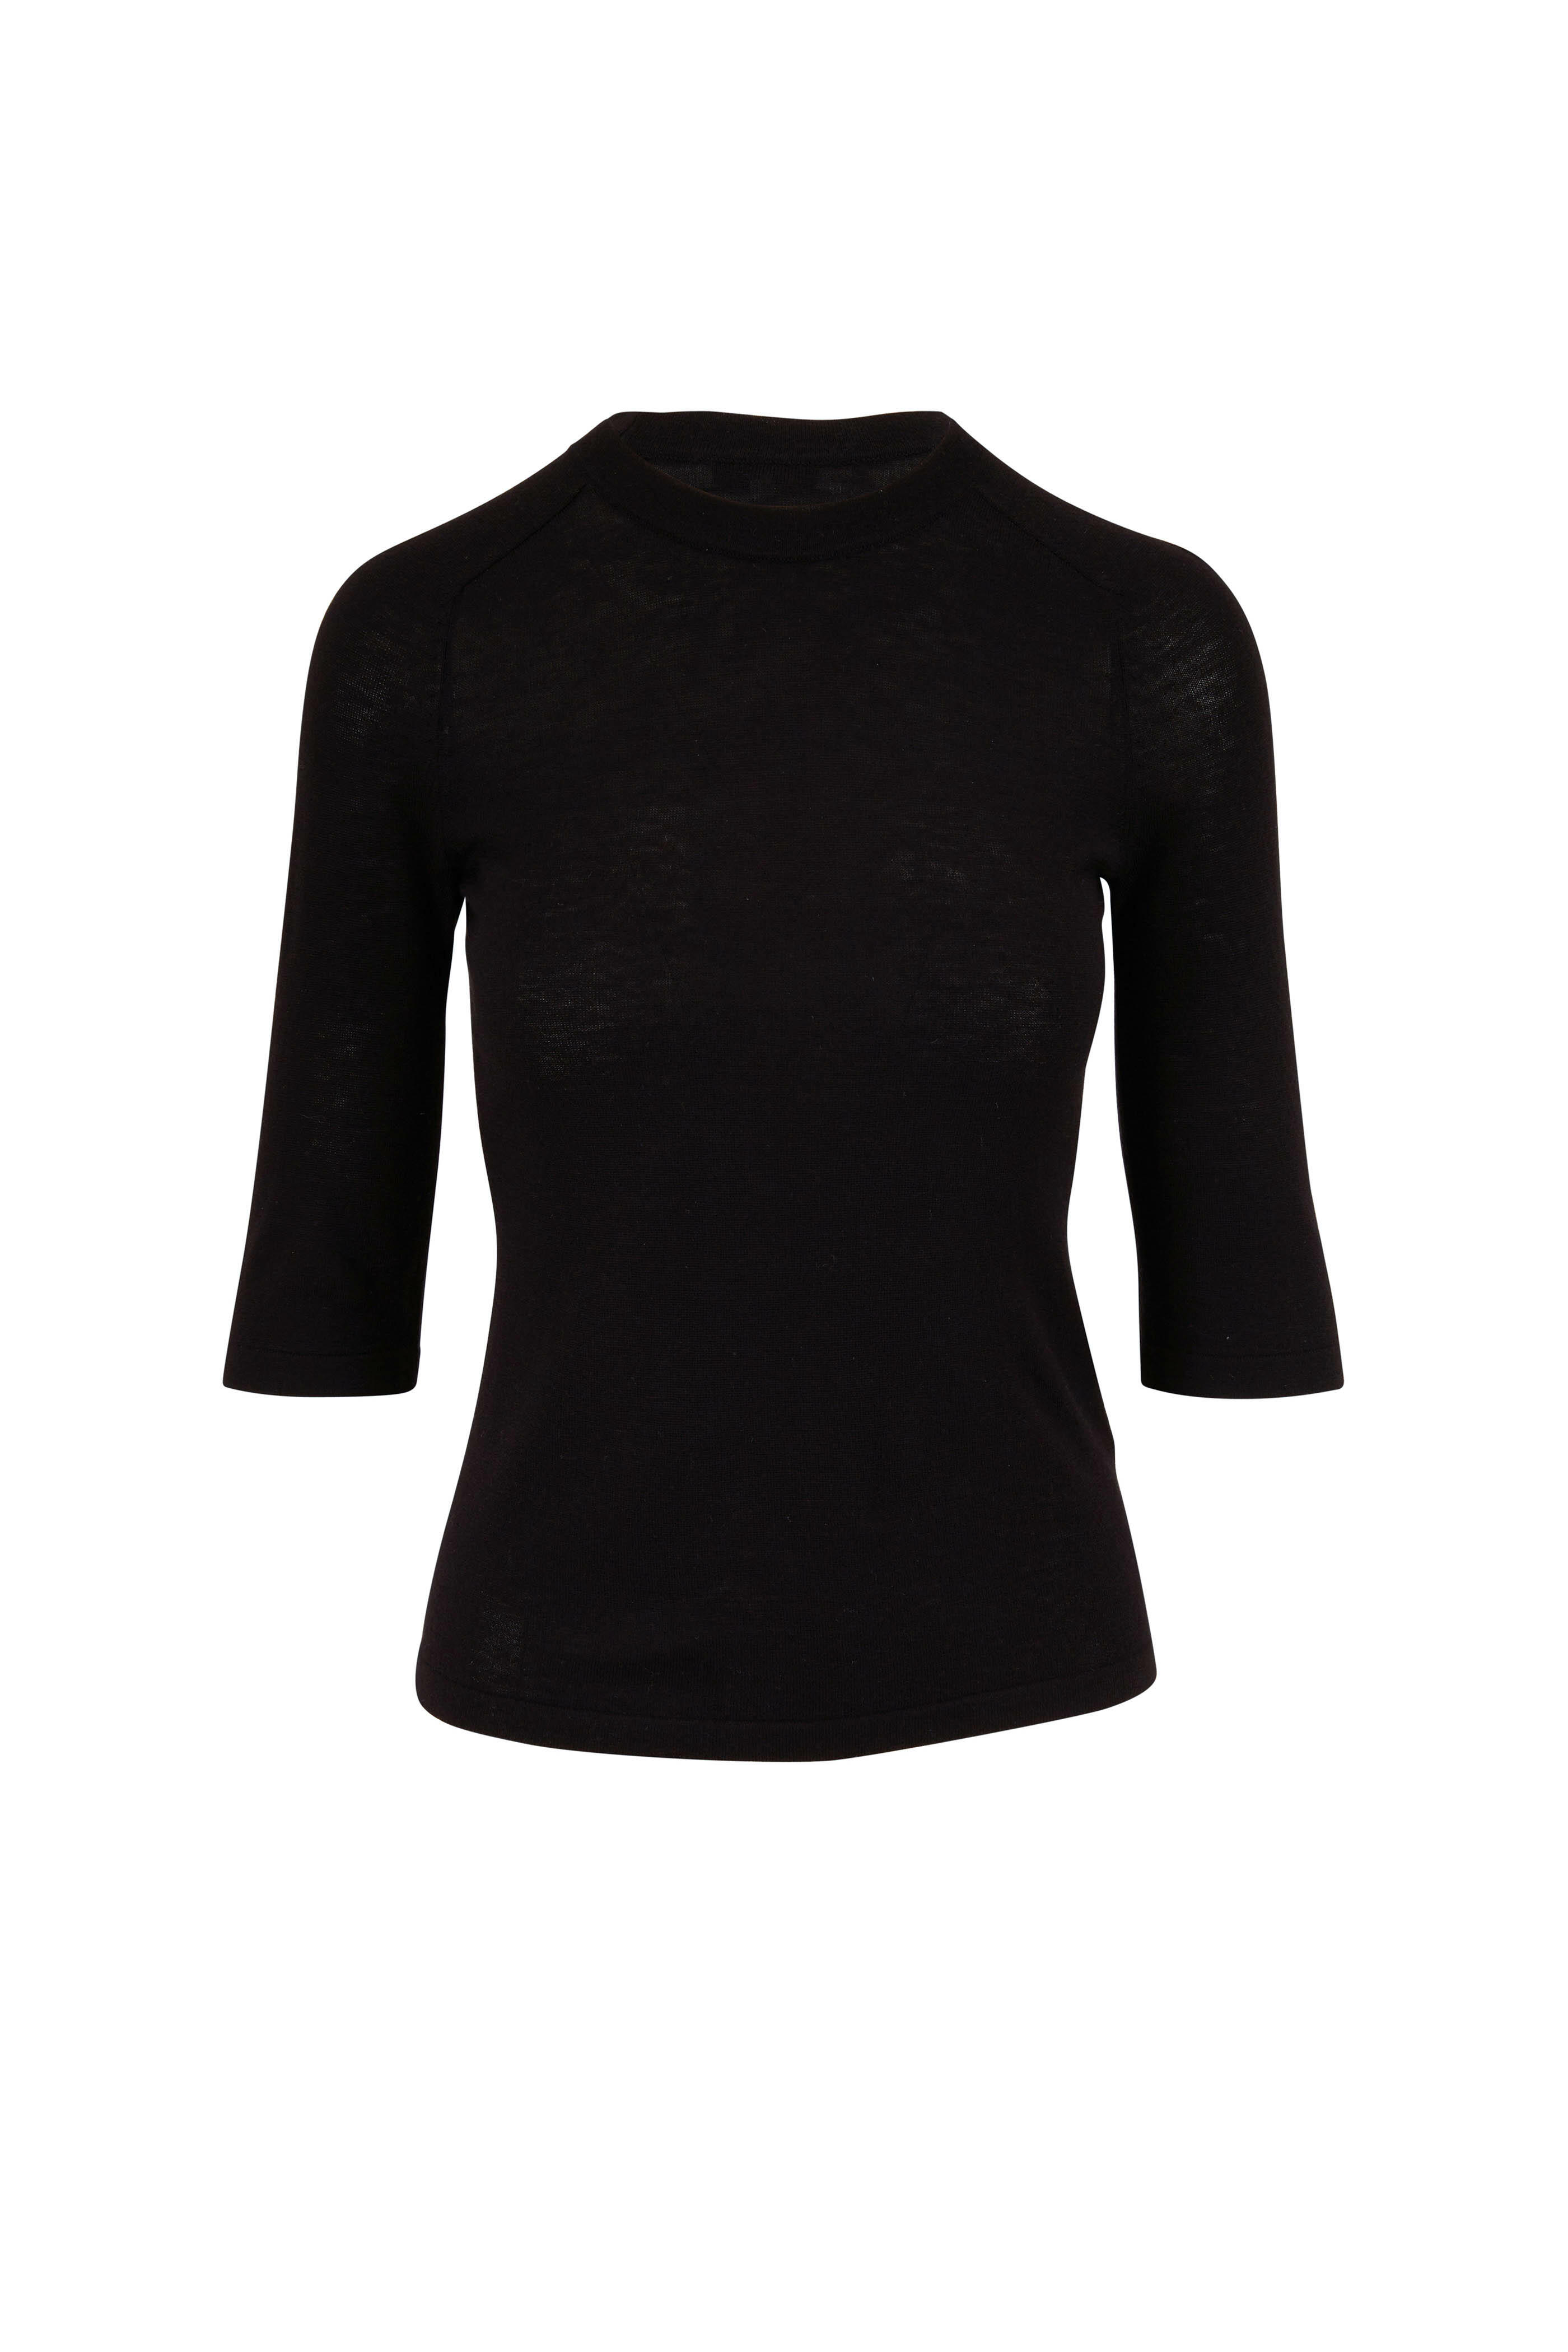 Vince - Black Elbow Sleeve Top | Mitchell Stores